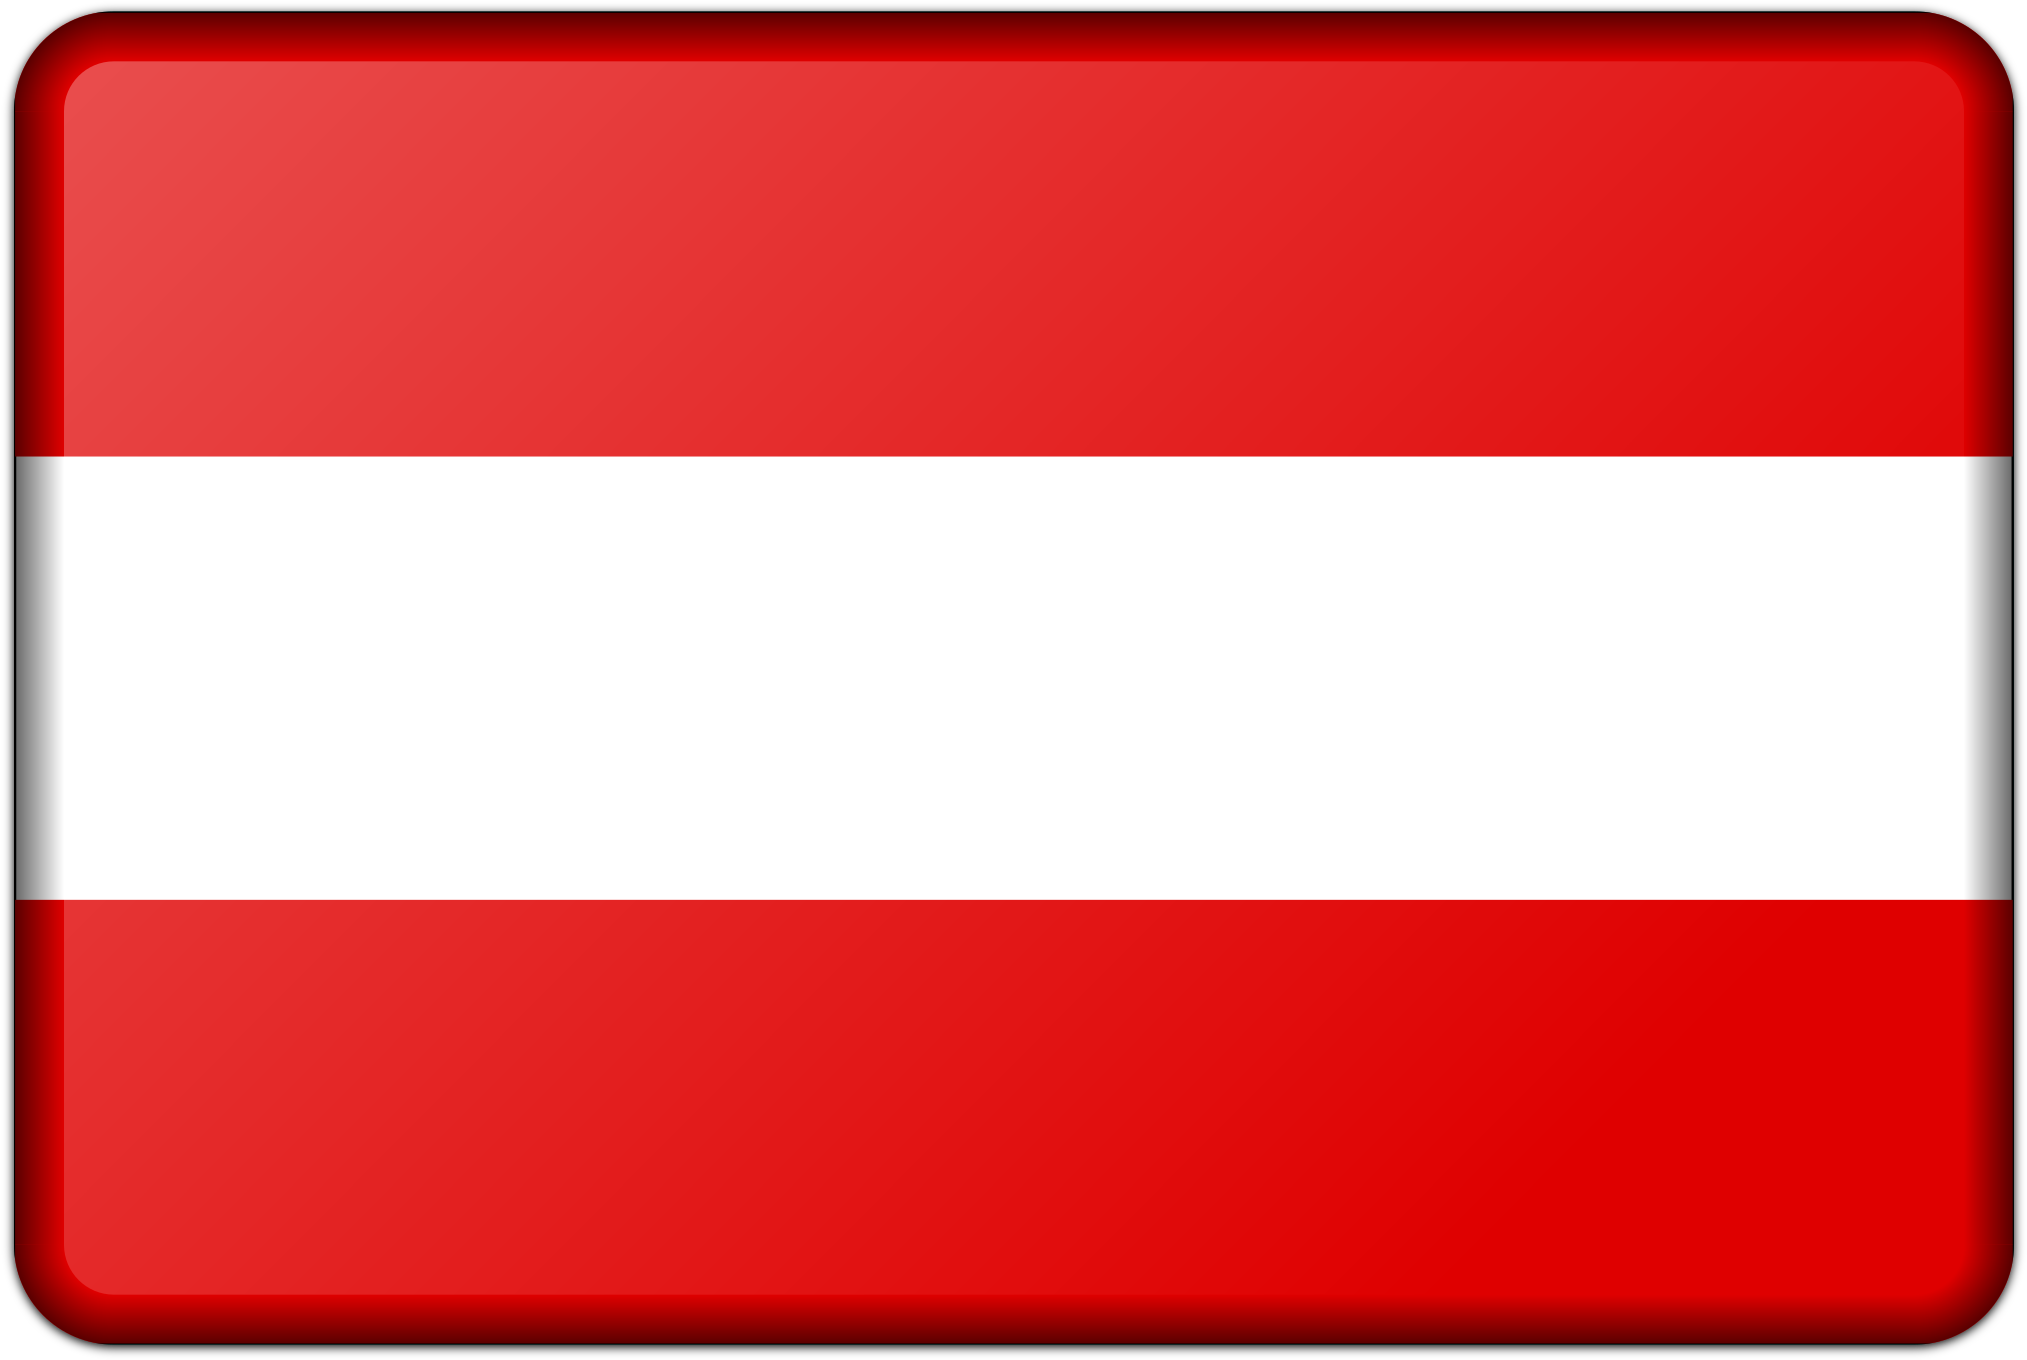 Austria Flag - Happy Independence Day 2017 India (2400x1600)